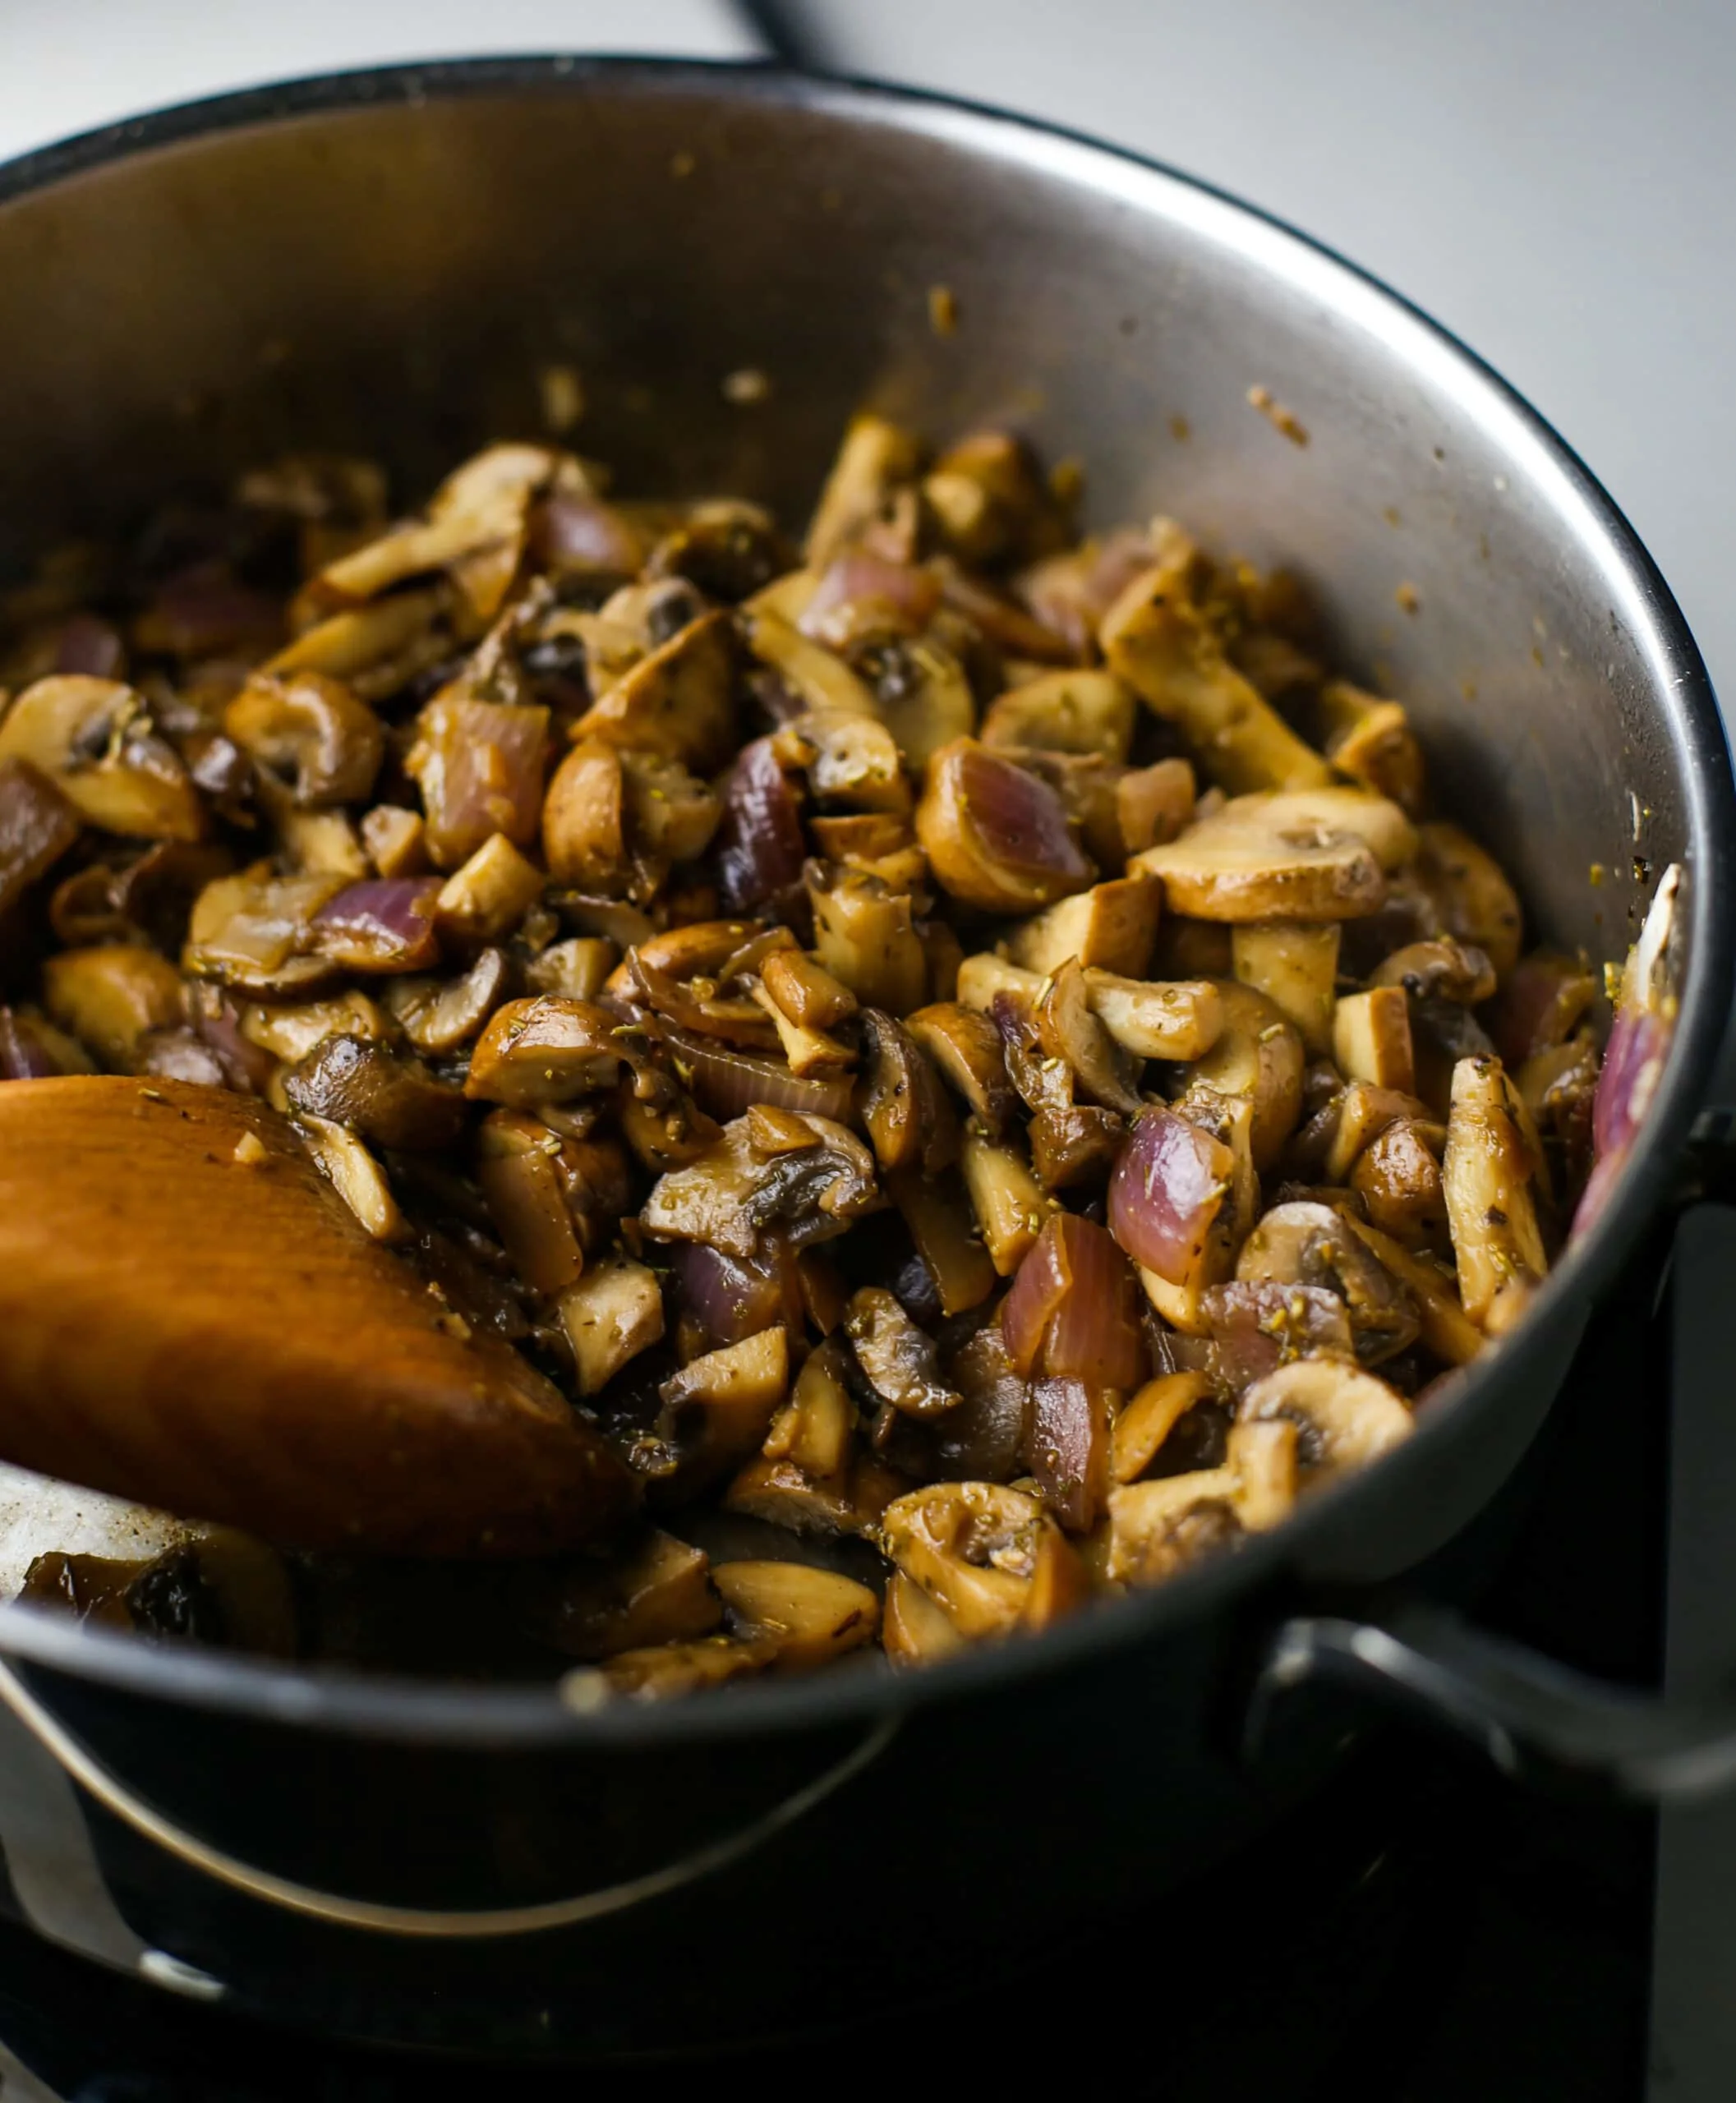 Sauteed browned sliced cremini mushrooms and red onions in a stainless steel saucepan.